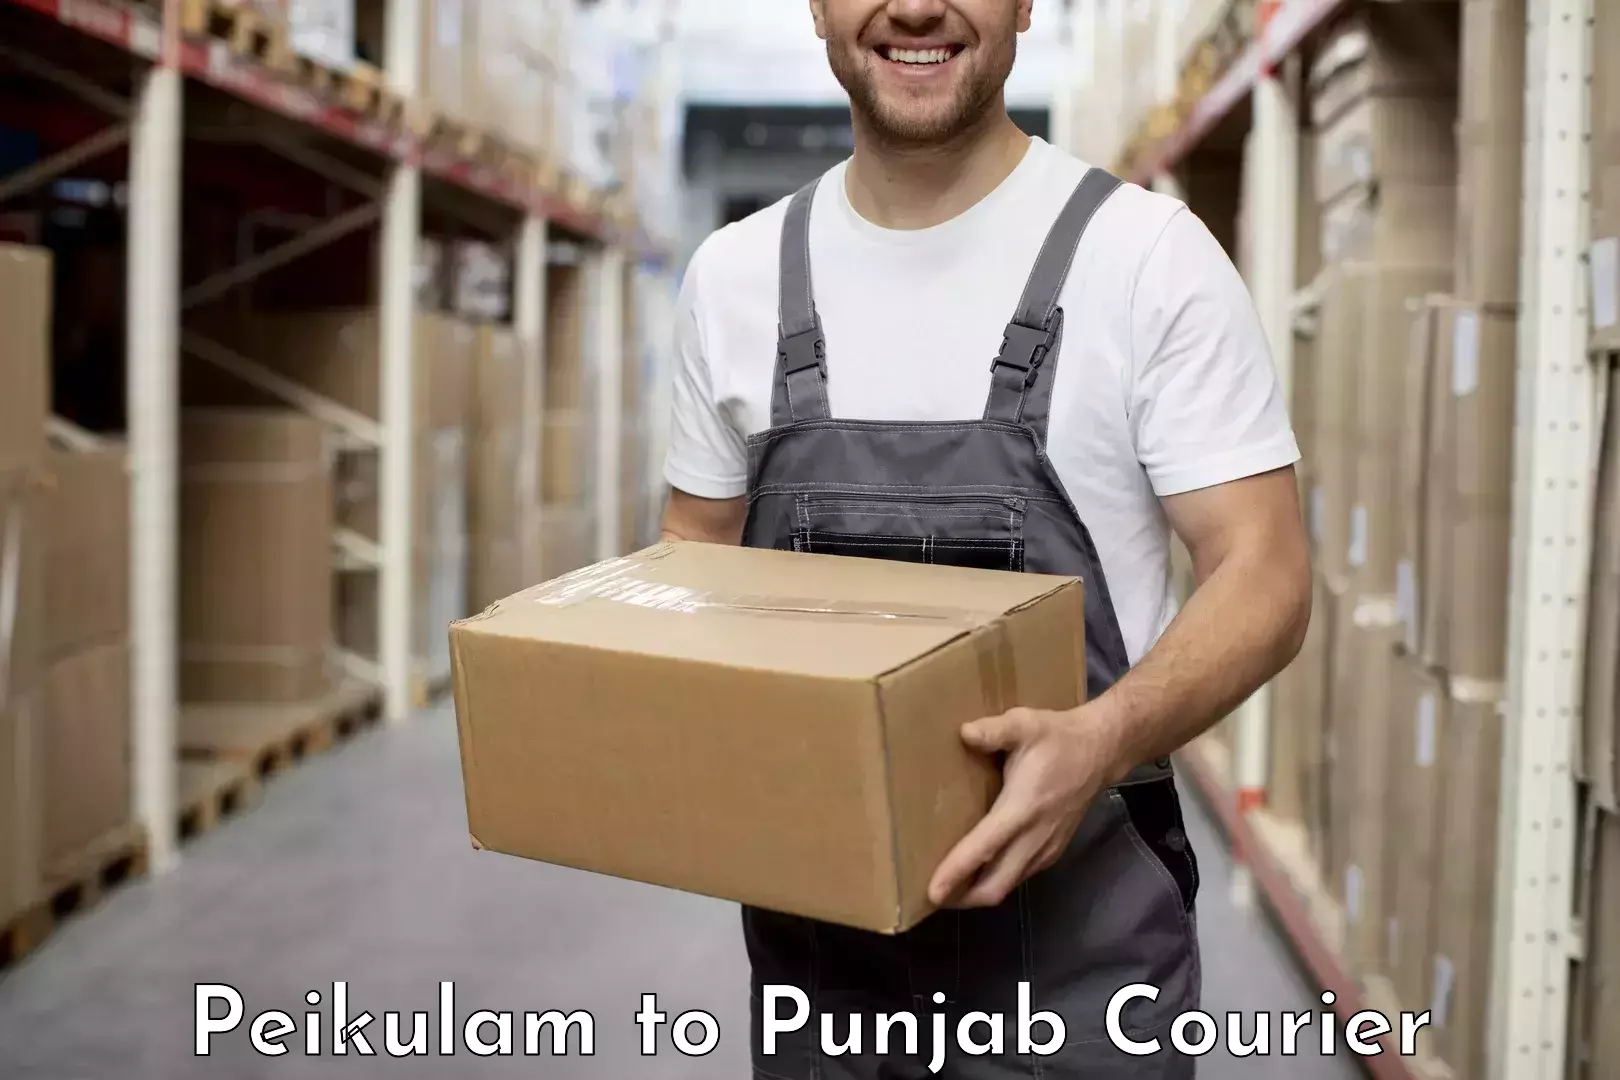 Courier service efficiency Peikulam to Amritsar